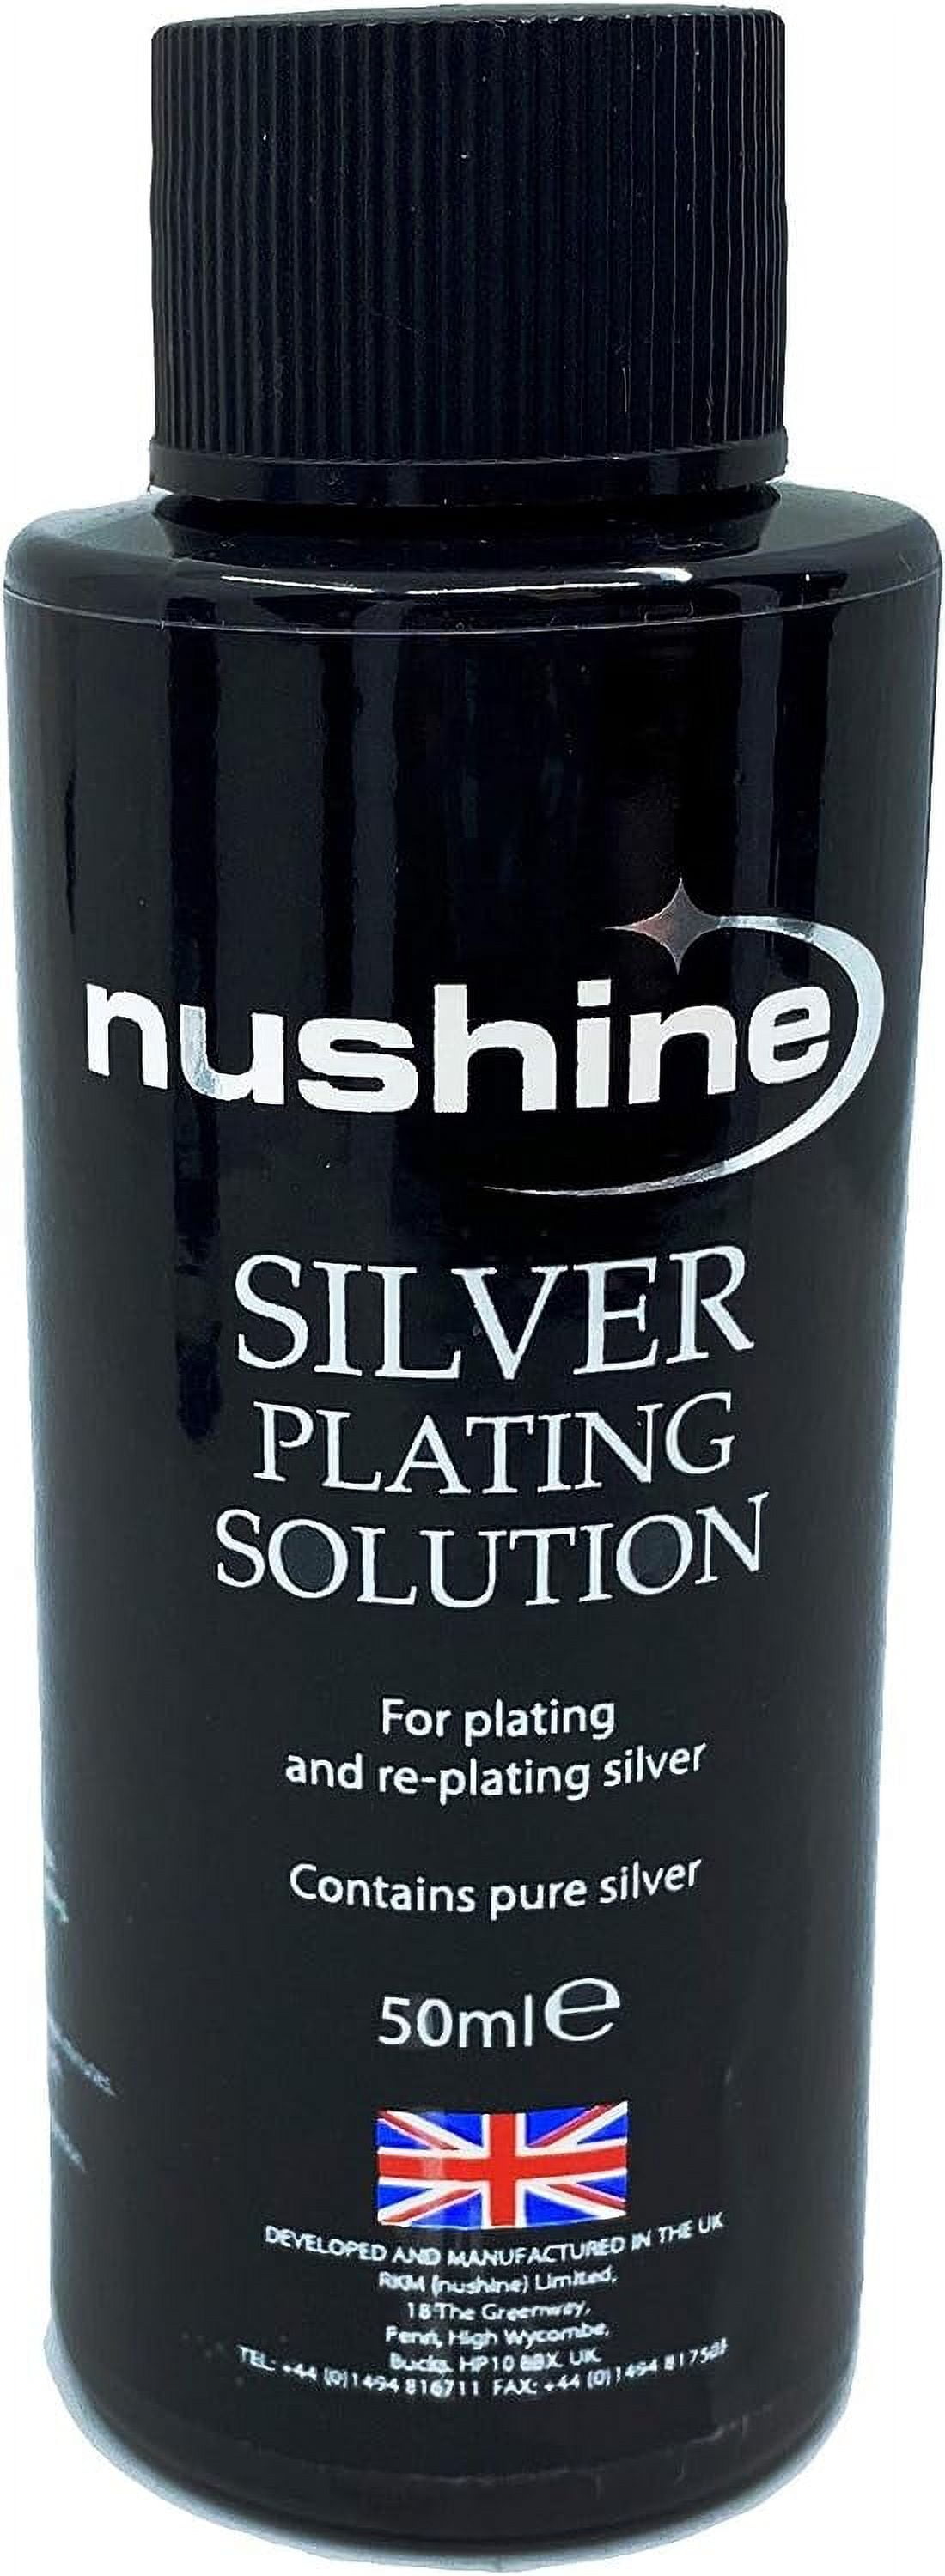 Nushine Silver Plating Solution 1.7 Oz - Permanently Plate Pure Silver onto  Worn Silver, Brass, Copper and Bronze (ecofriendly Formula)